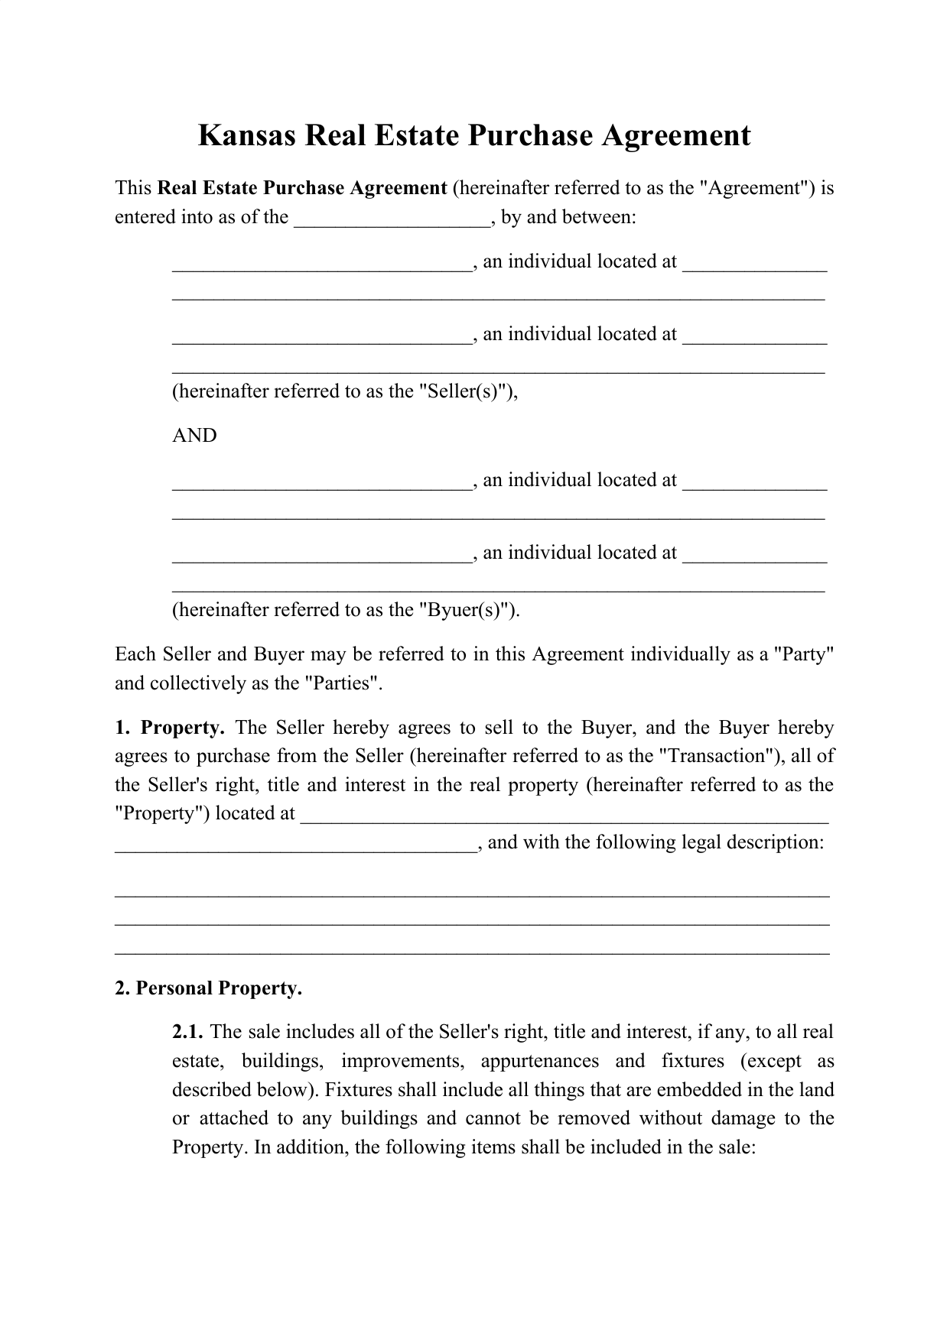 kansas-real-estate-purchase-agreement-template-fill-out-sign-online